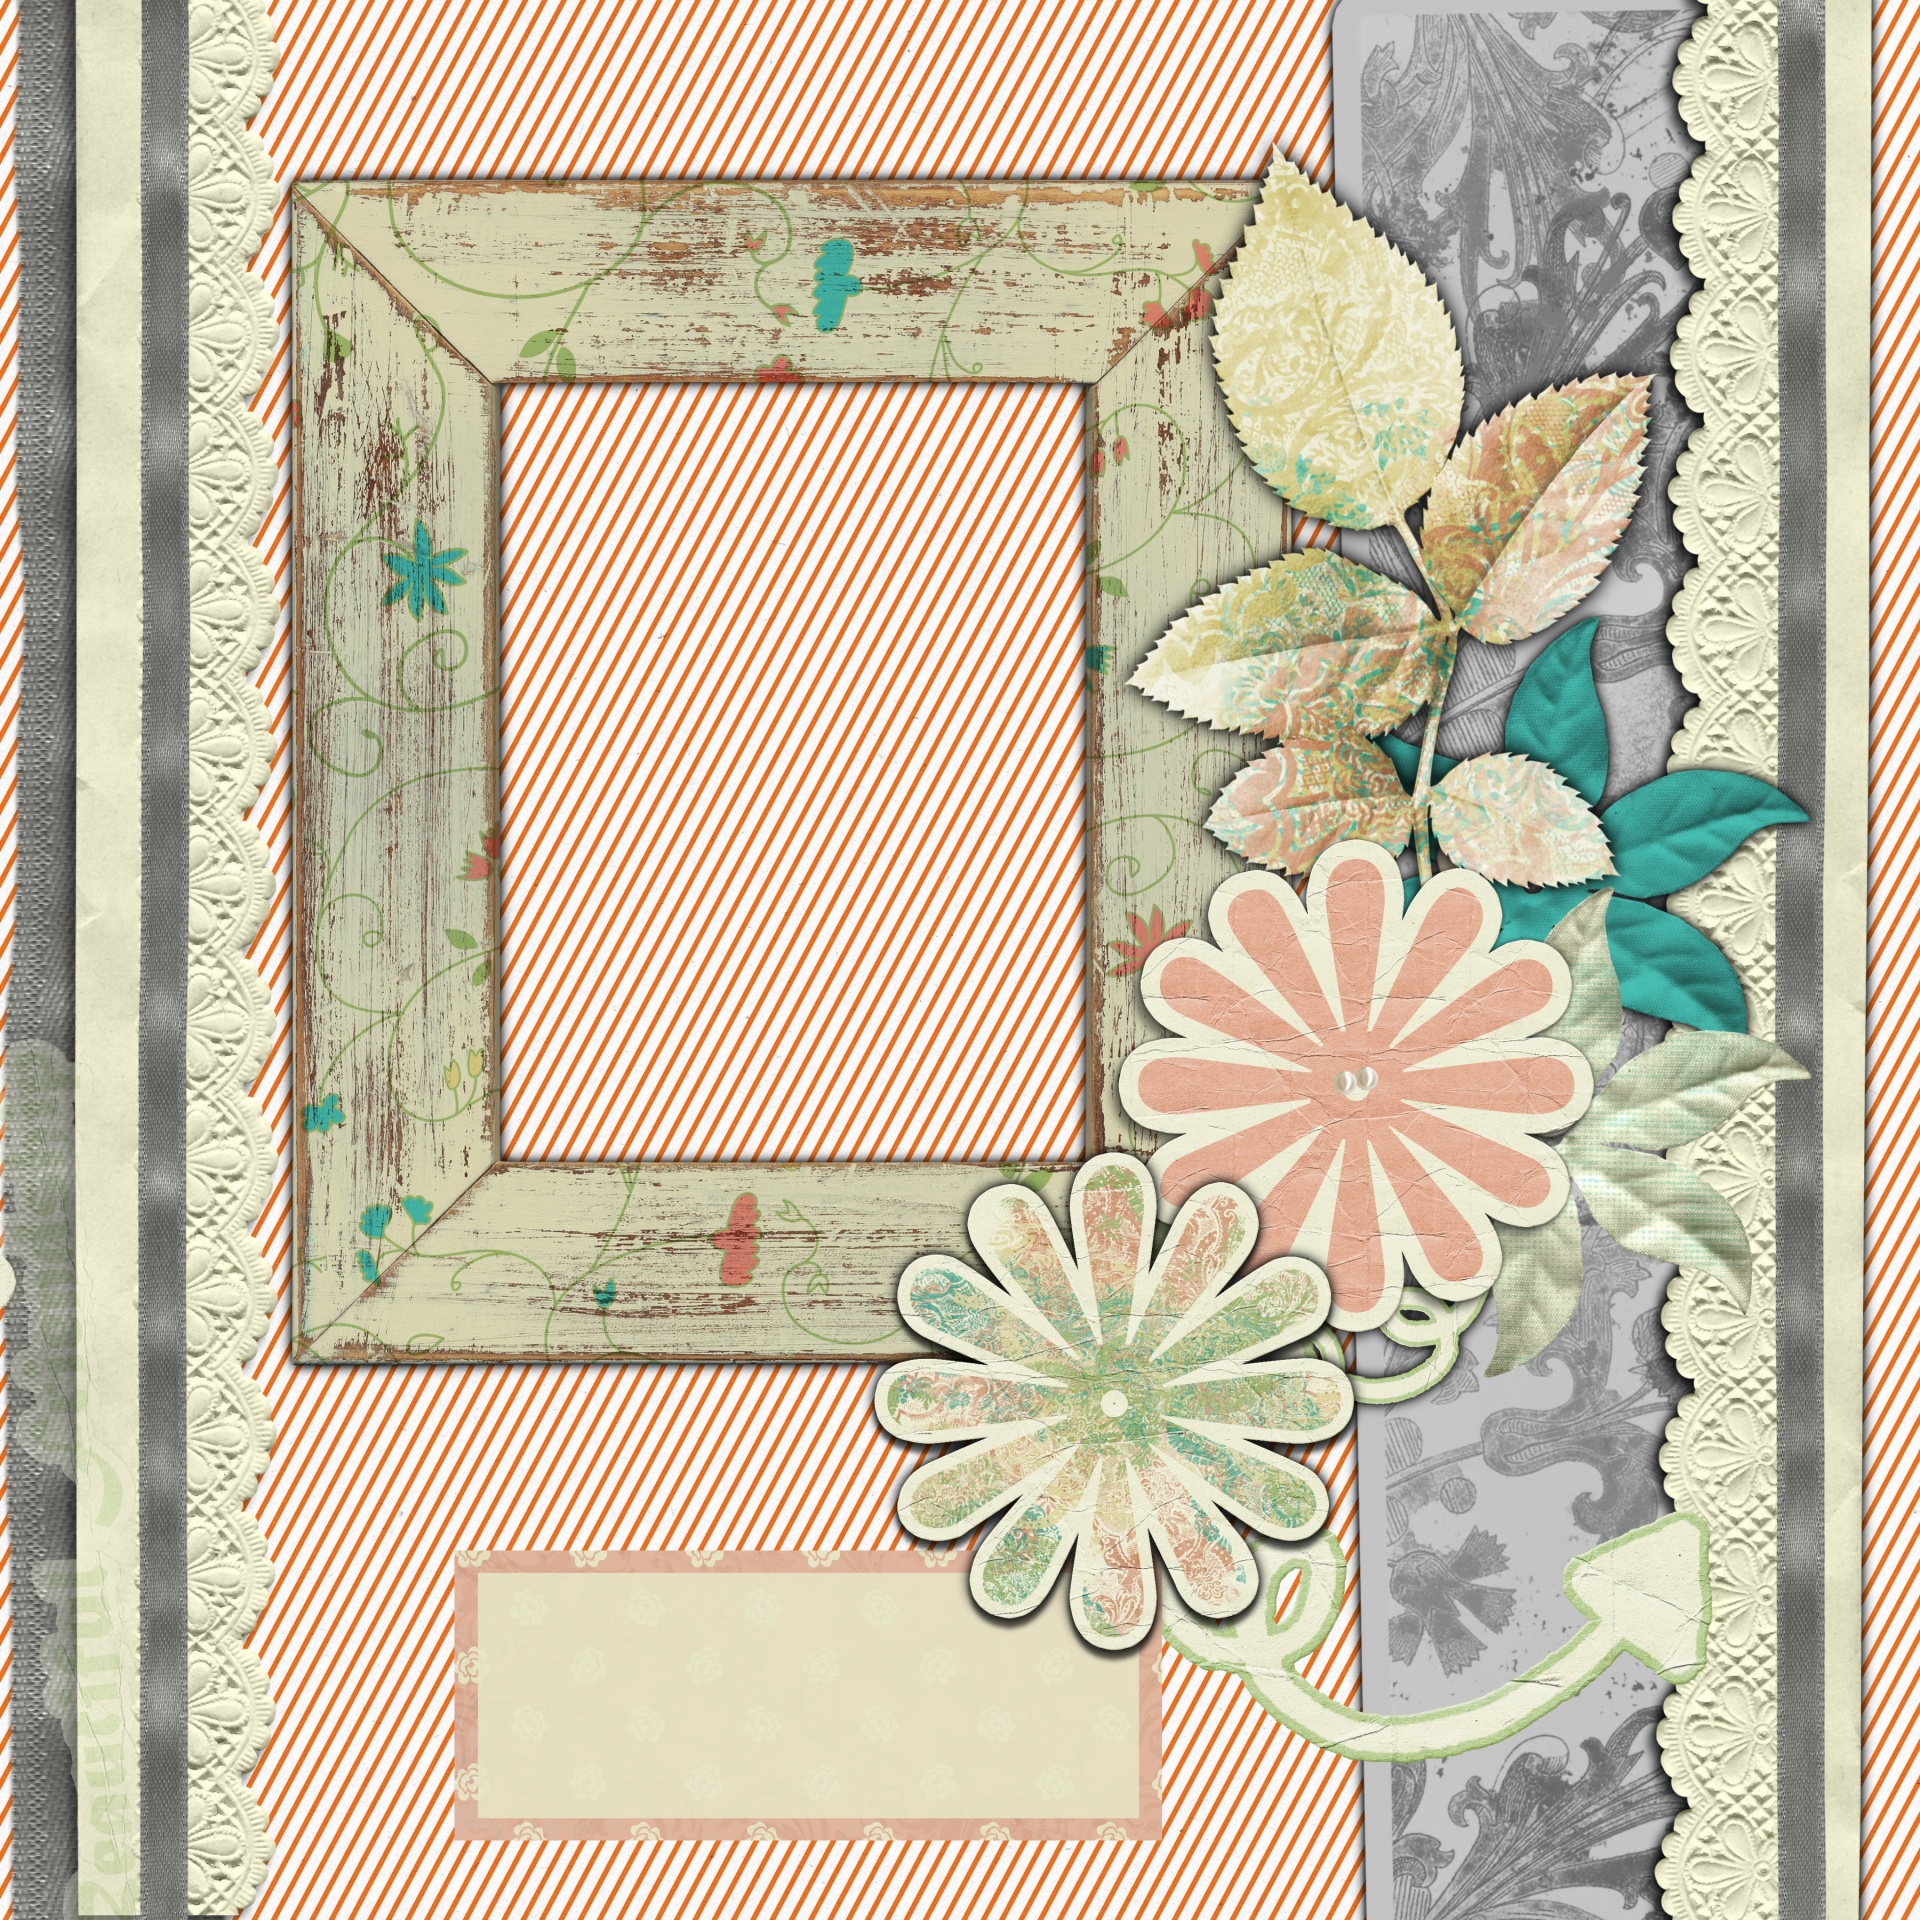 scrapbook-background-page-paper-digital-free-image-from-needpix